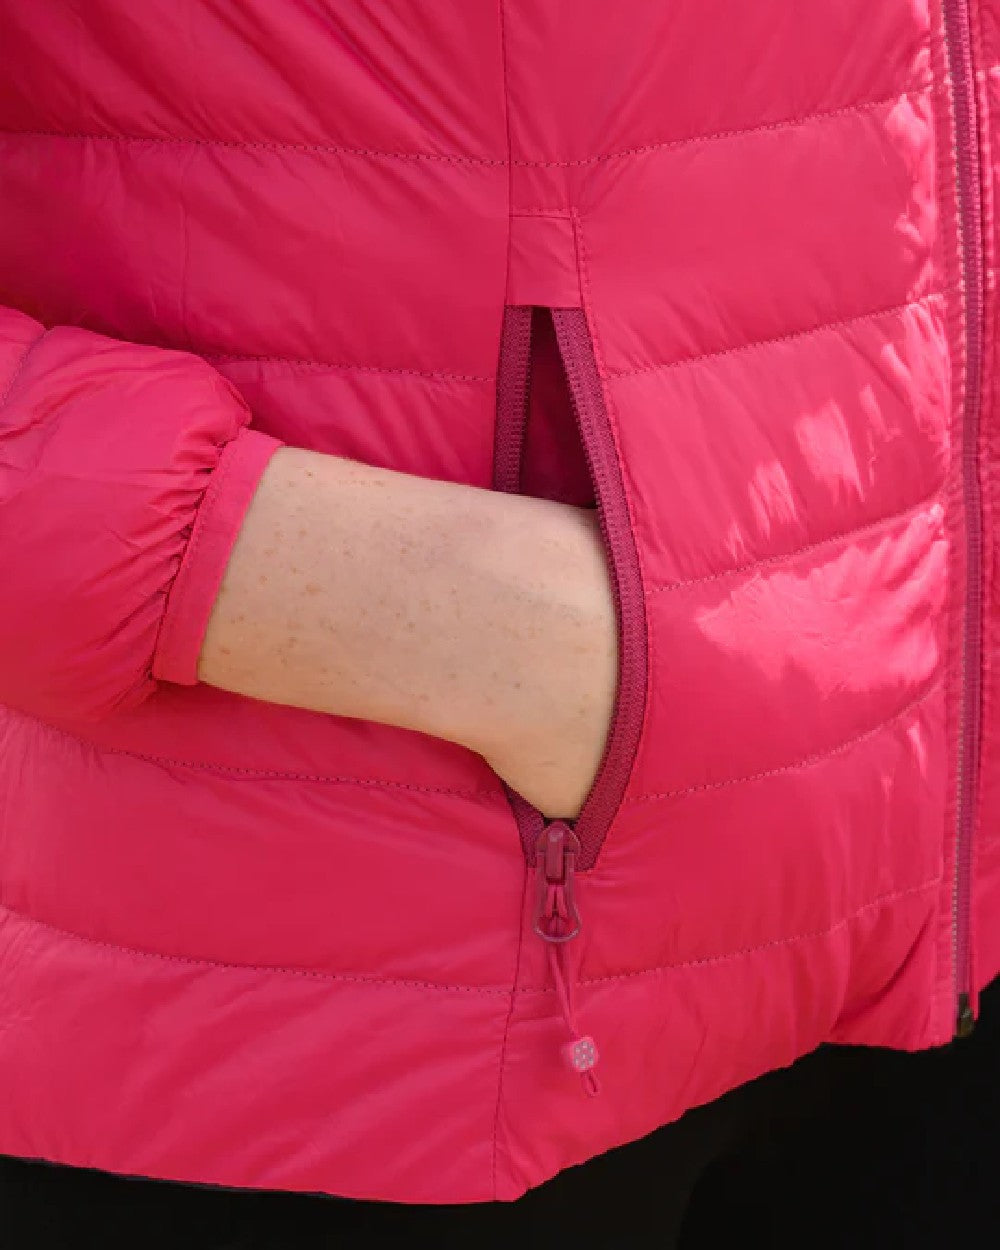 Fuchsia Navy coloured Mac In A Sac Packable Womens Down Jacket on blurry background 